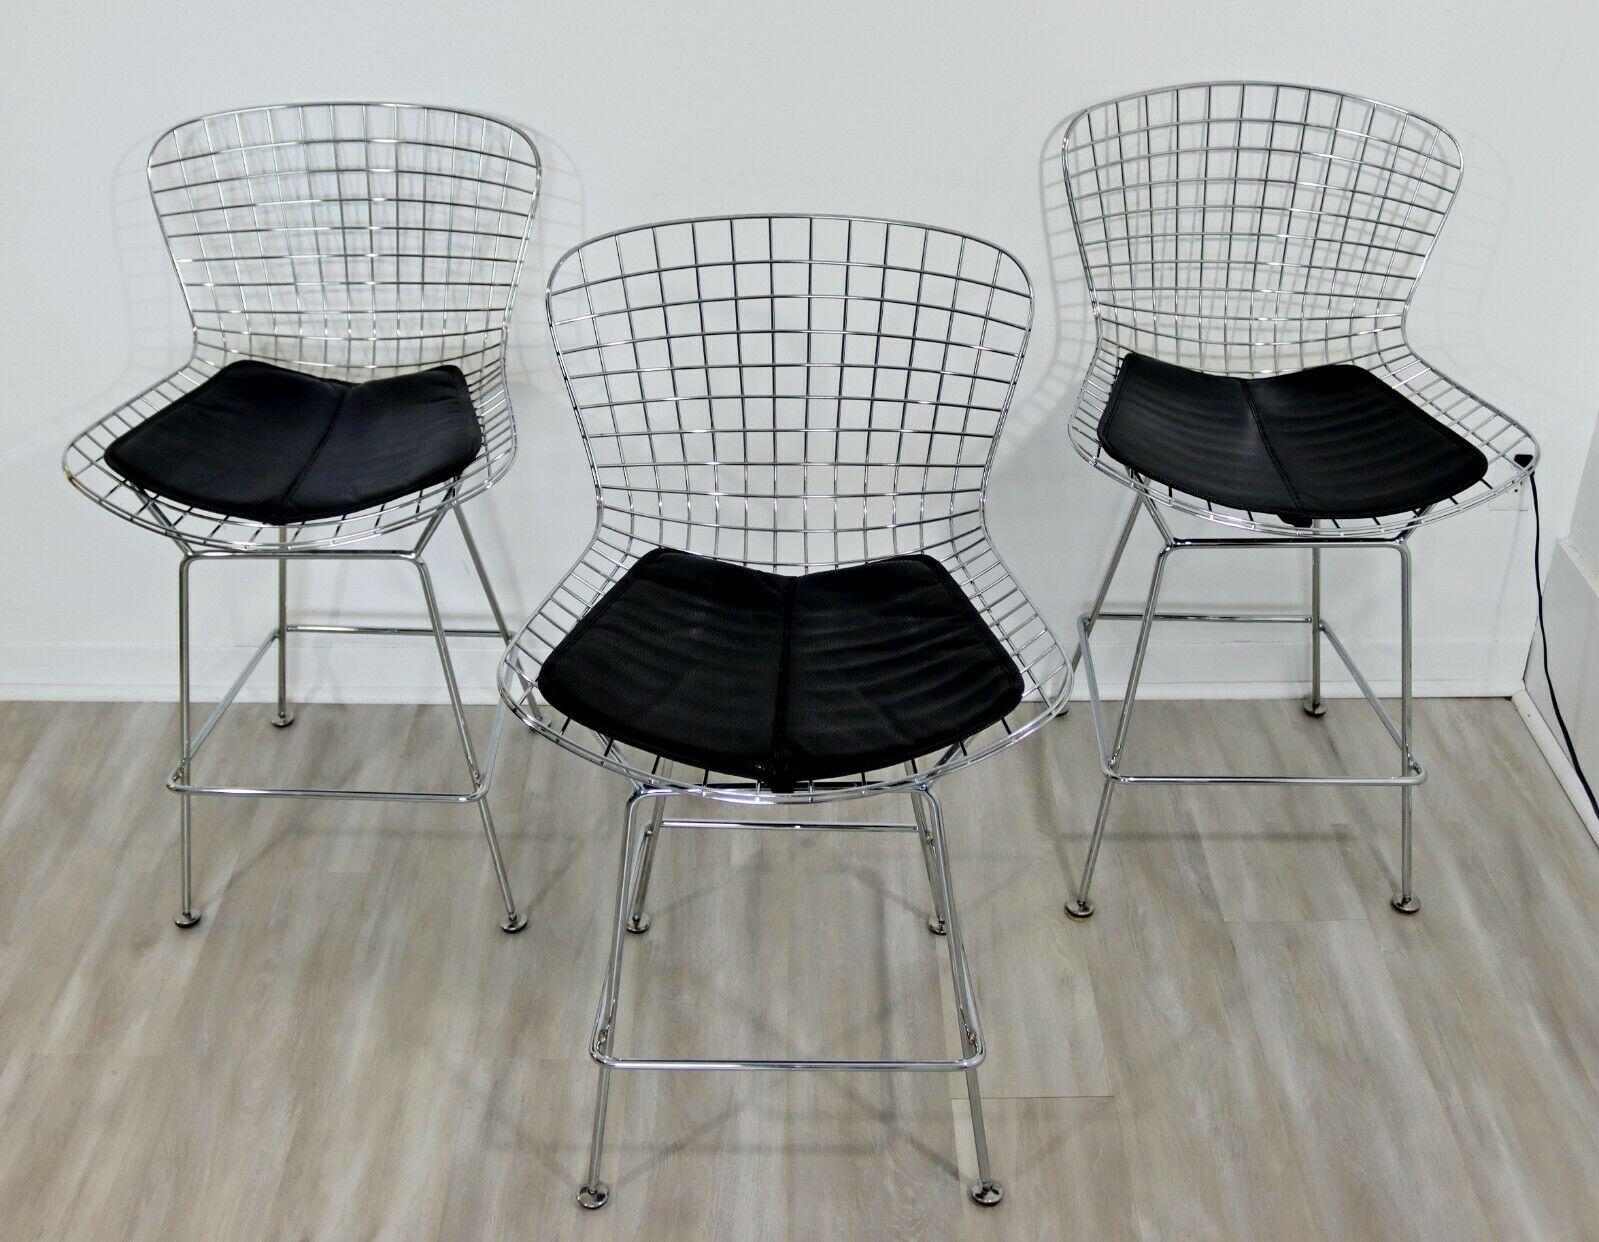 For your consideration is a wonderful set of three, chrome wire bar stools, with original vinyl seats, In the style of Harry Bertoia. In excellent condition. The dimensions are 21.5